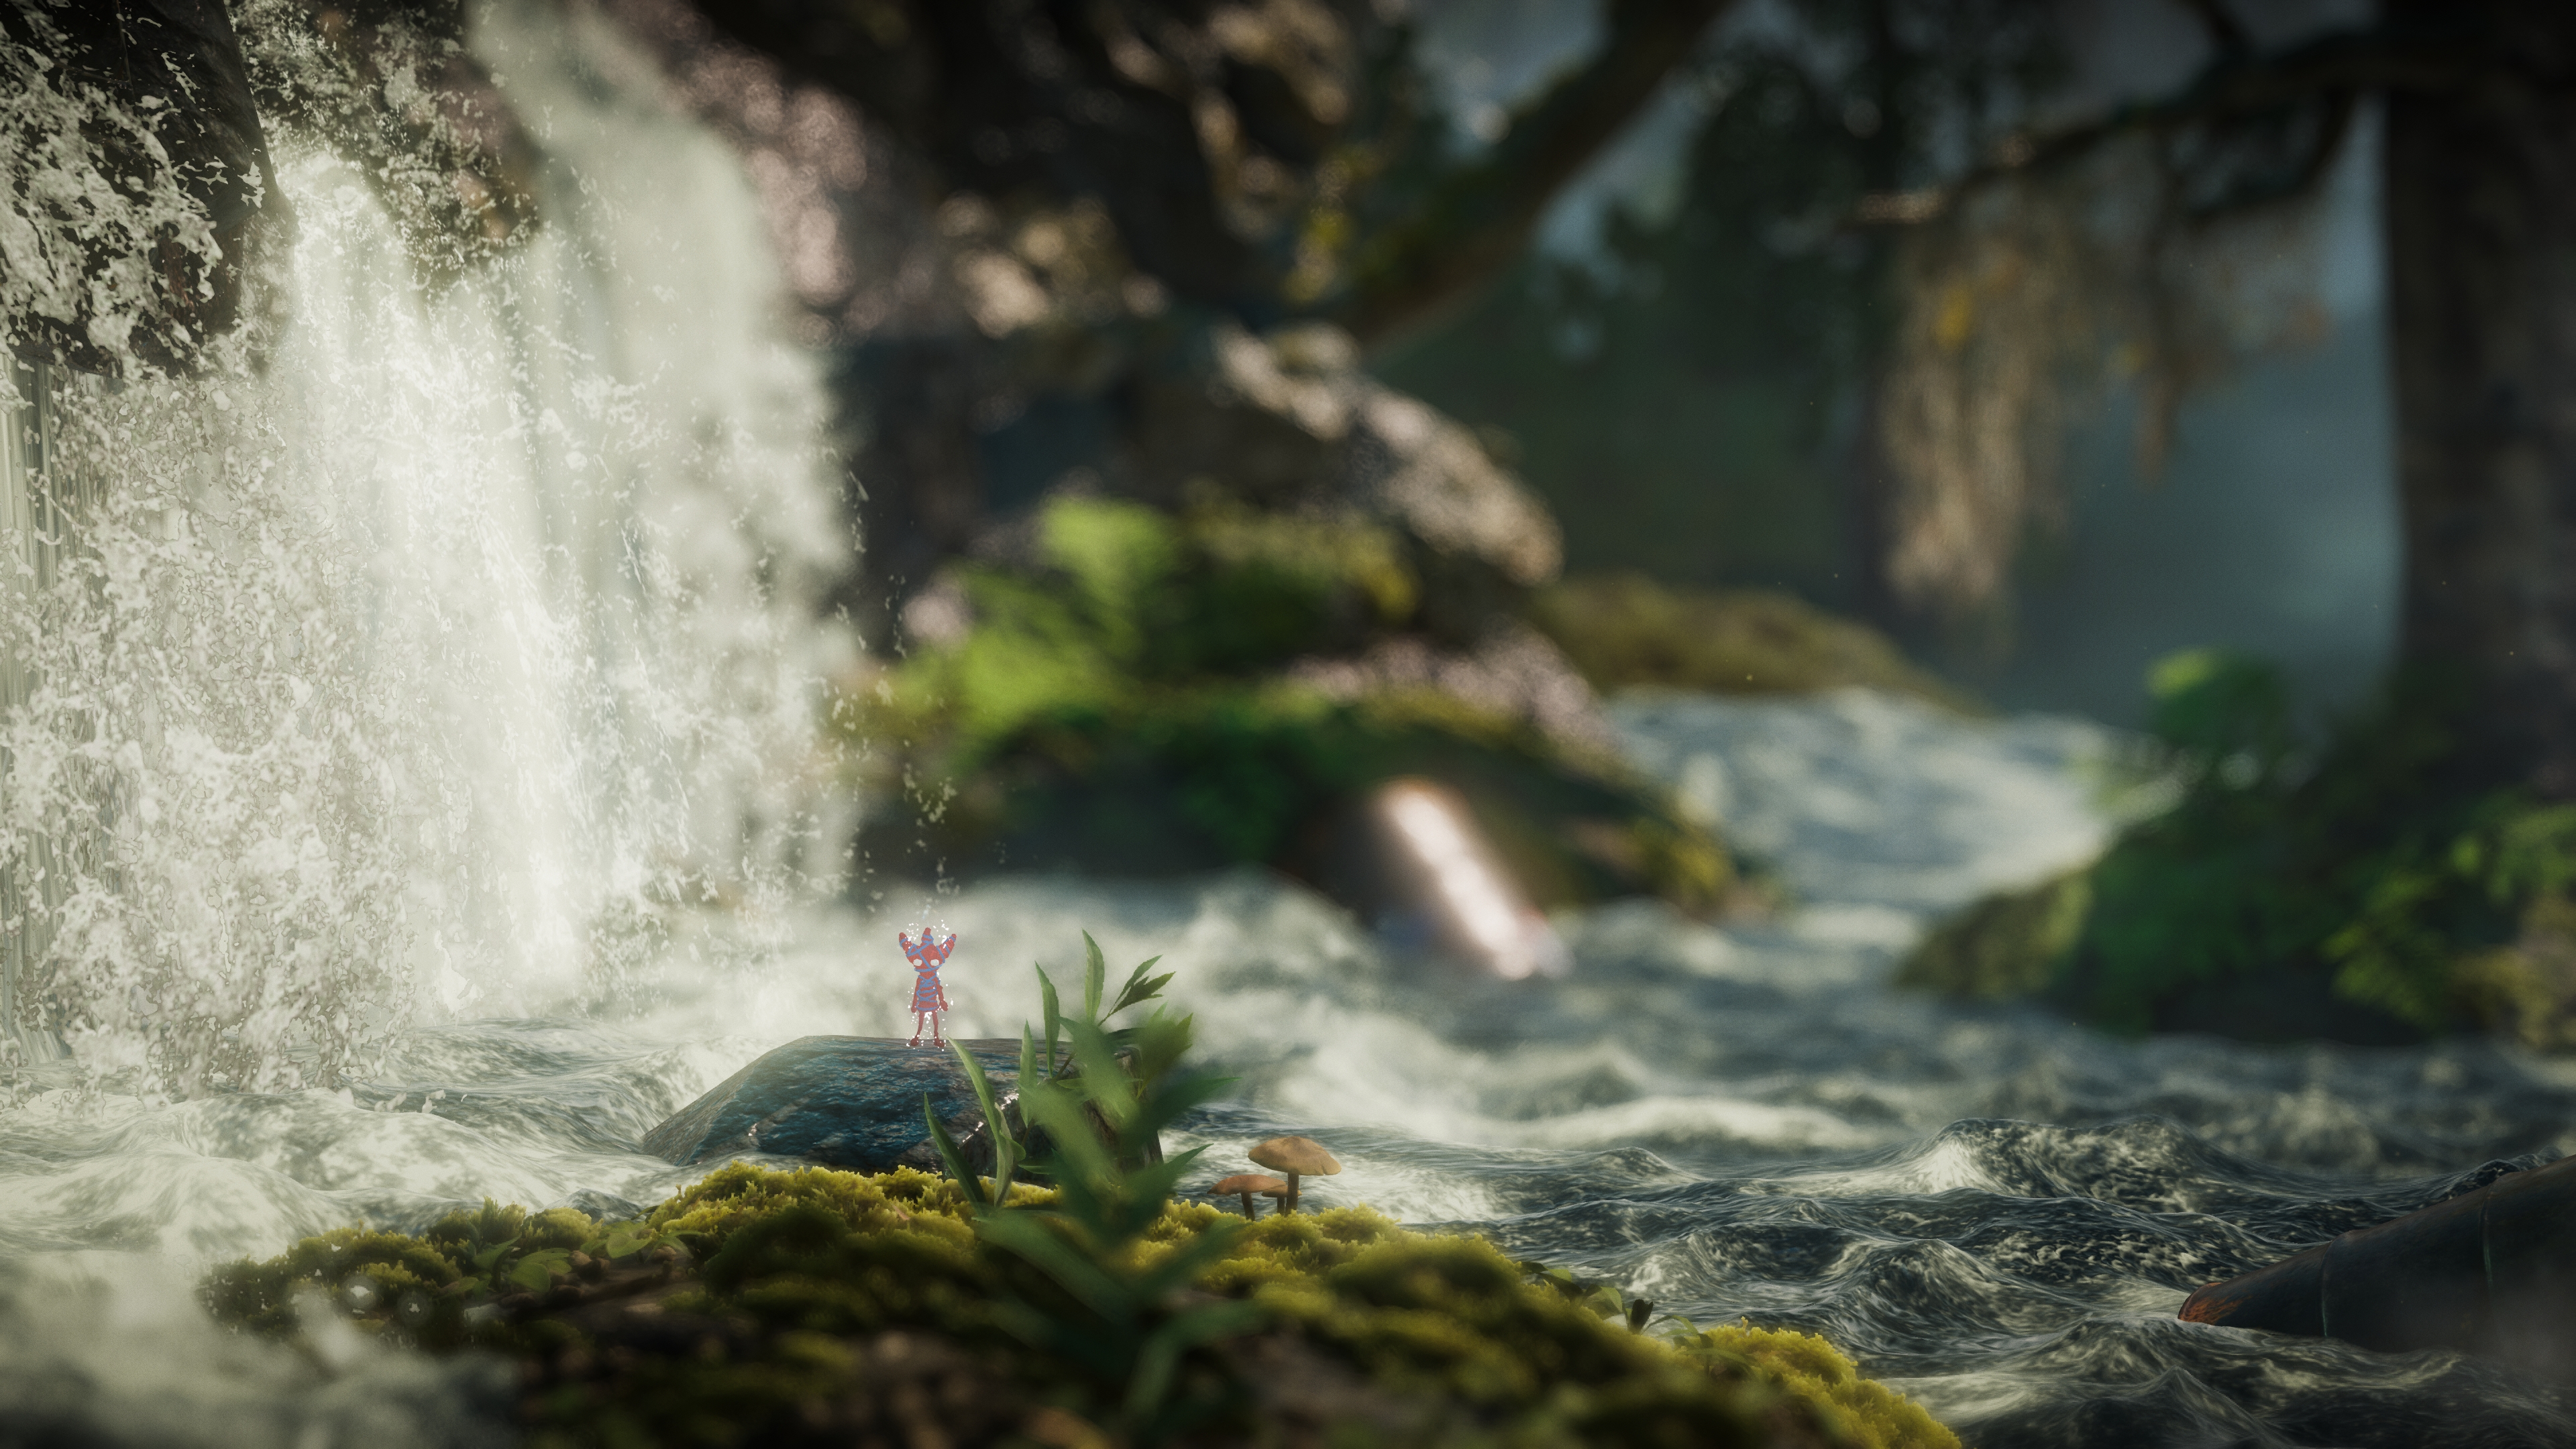 Unravel Two PC Game - Free Download Full Version